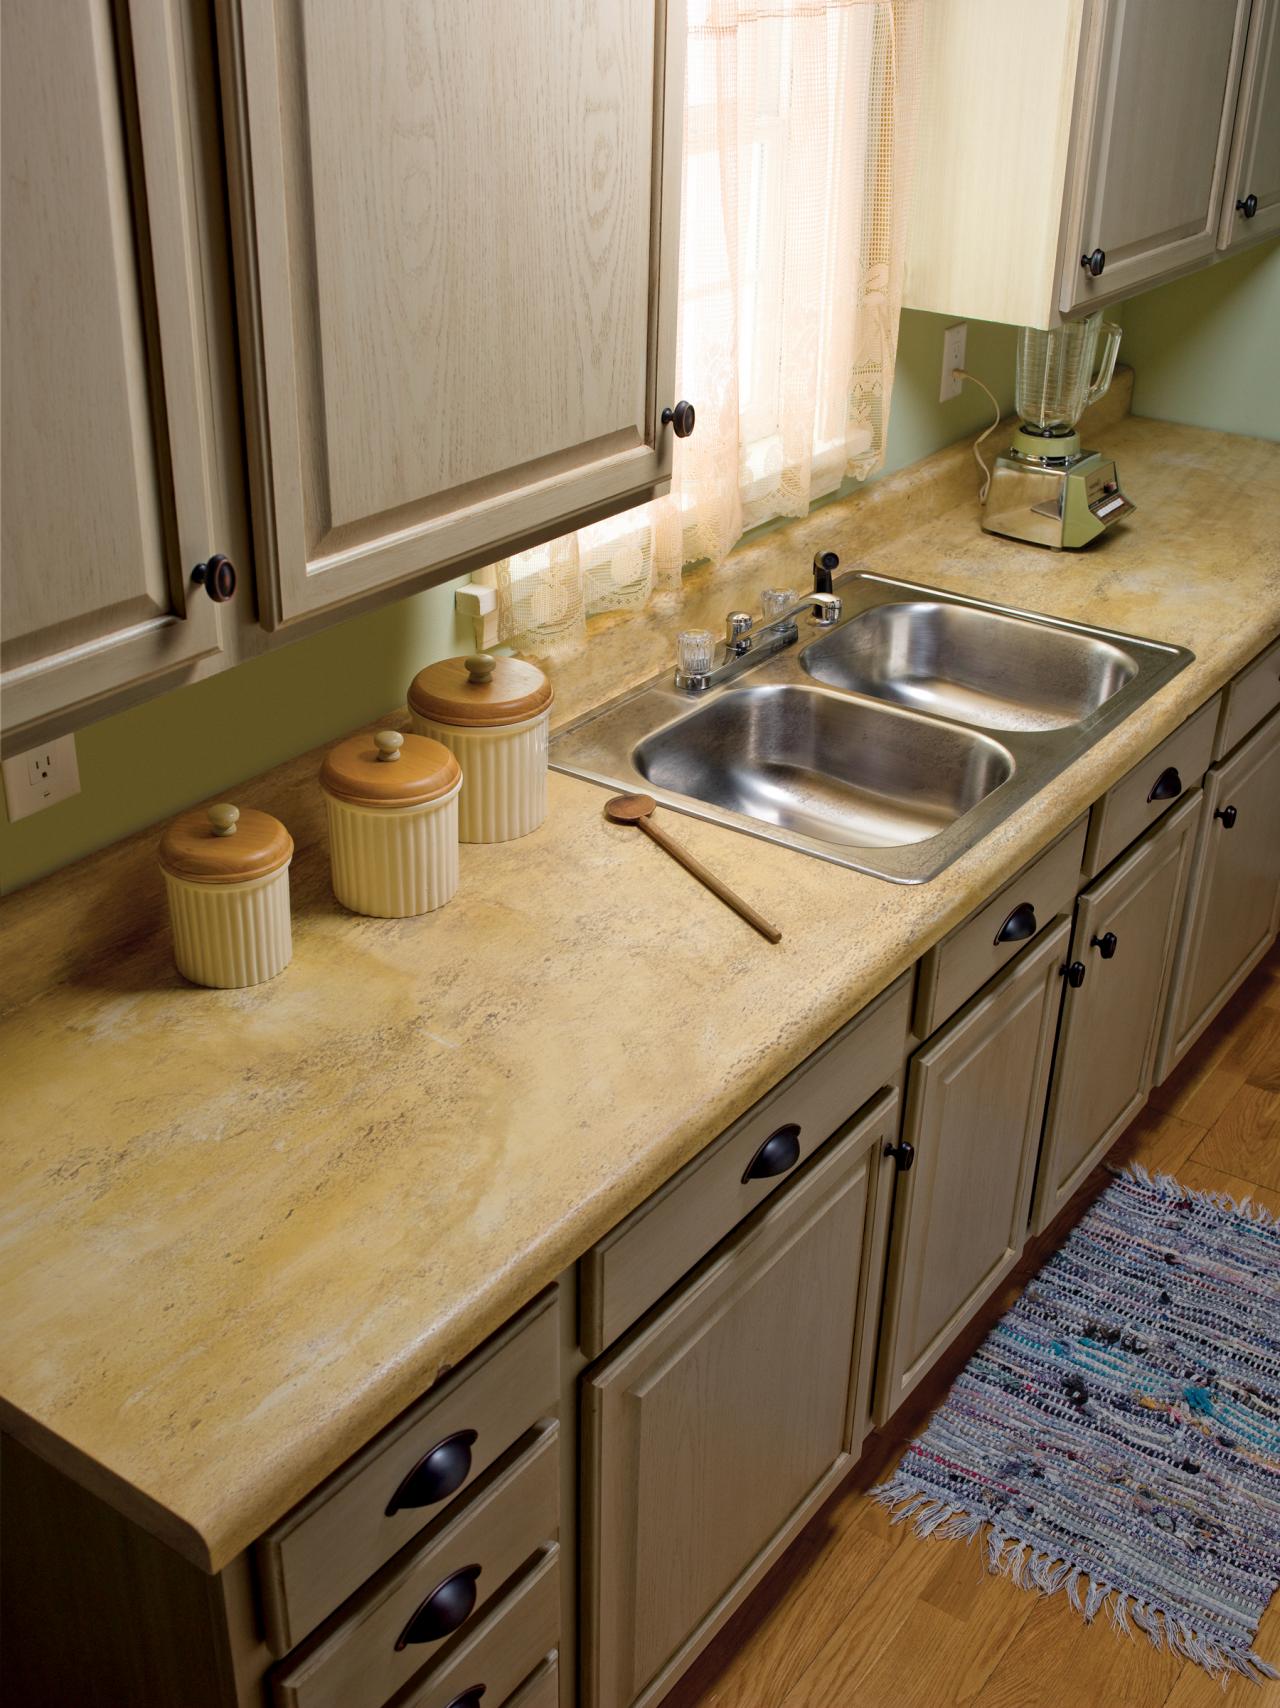 Refinish Laminate Countertops, How To Repair Scratches On Countertops